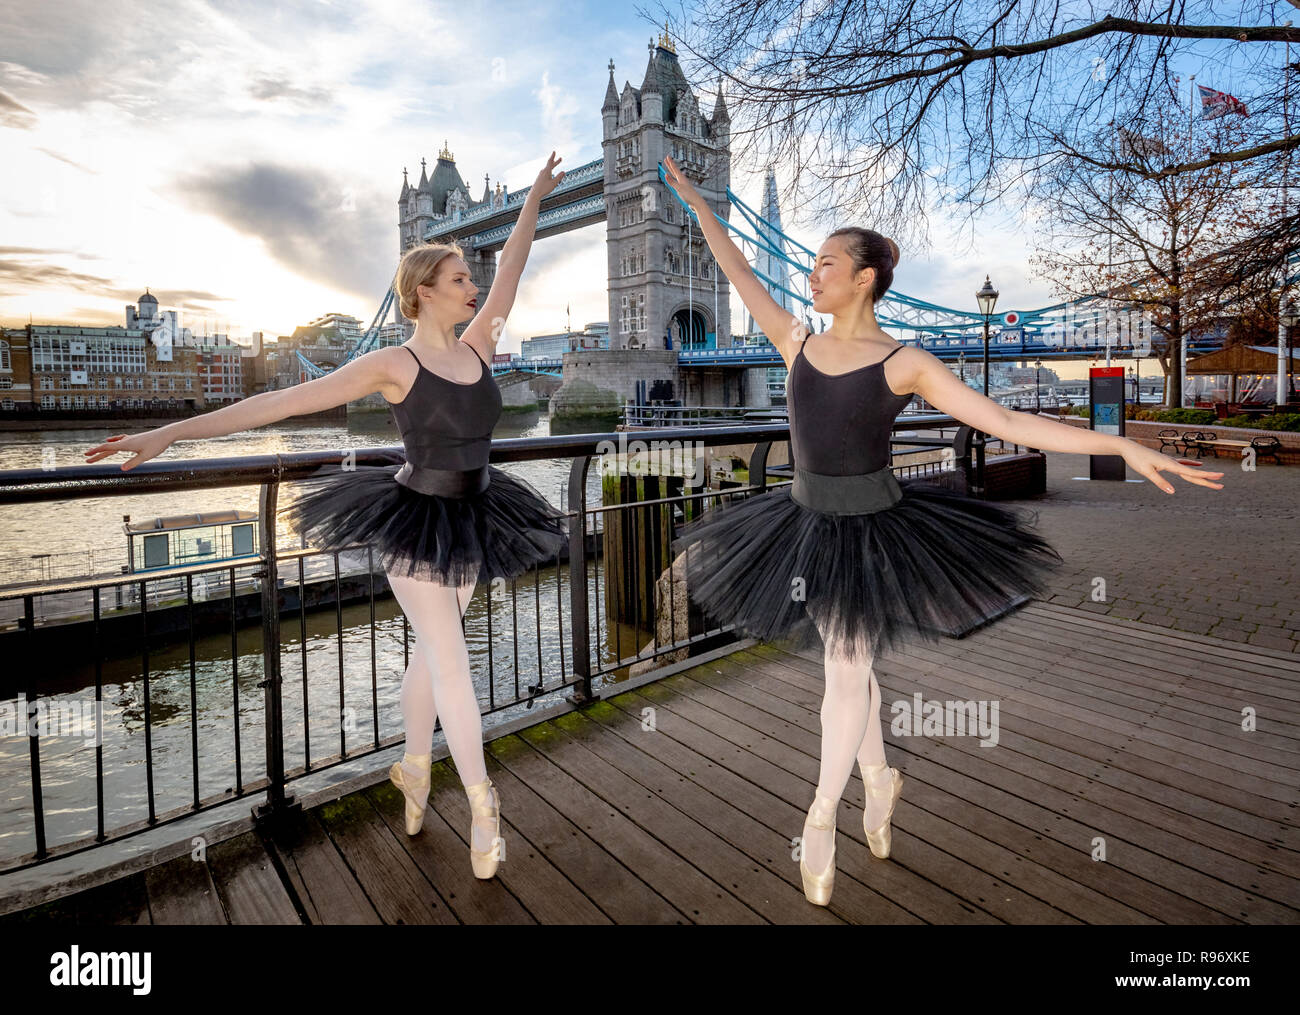 London, UK. 20th December, 2018. Dancers from Semaphore Ballet Company perform at Tower Hill in the last evening sun before the winter solstice. Tonight will be the longest night of the year with the sun not rising until 08:03 GMT on Friday morning. Dancers pictured(L-R) Beth Wareing and Natsuki Uemura. Credit: Guy Corbishley/Alamy Live News Stock Photo